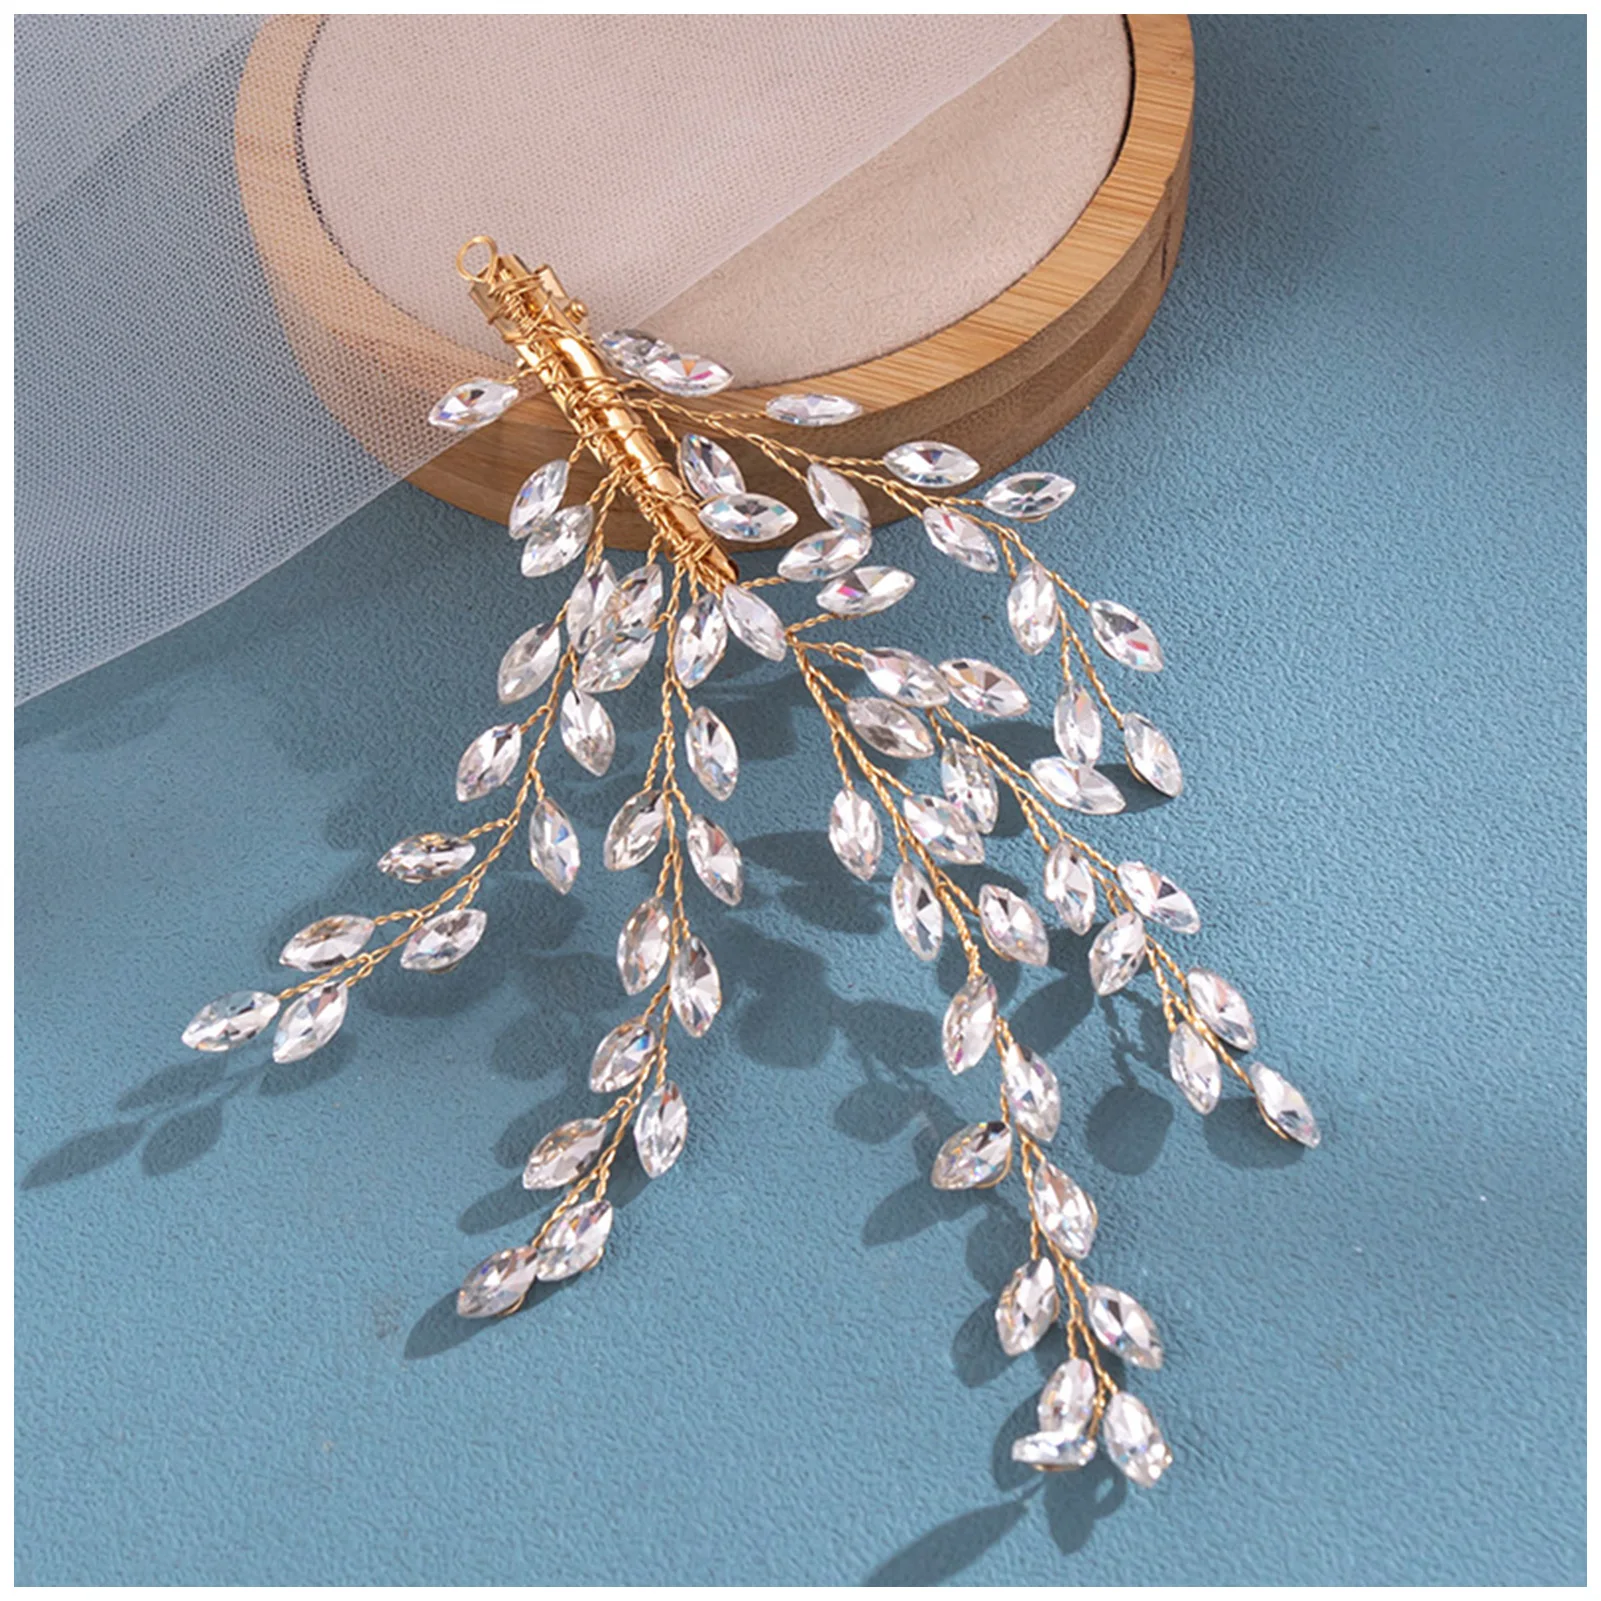 

Woman's Rhinestones Hair Clips Headpiece Stable Grip Sparkling Rhinestones Headpiece for Dress Hairstyle Making Tools FS99